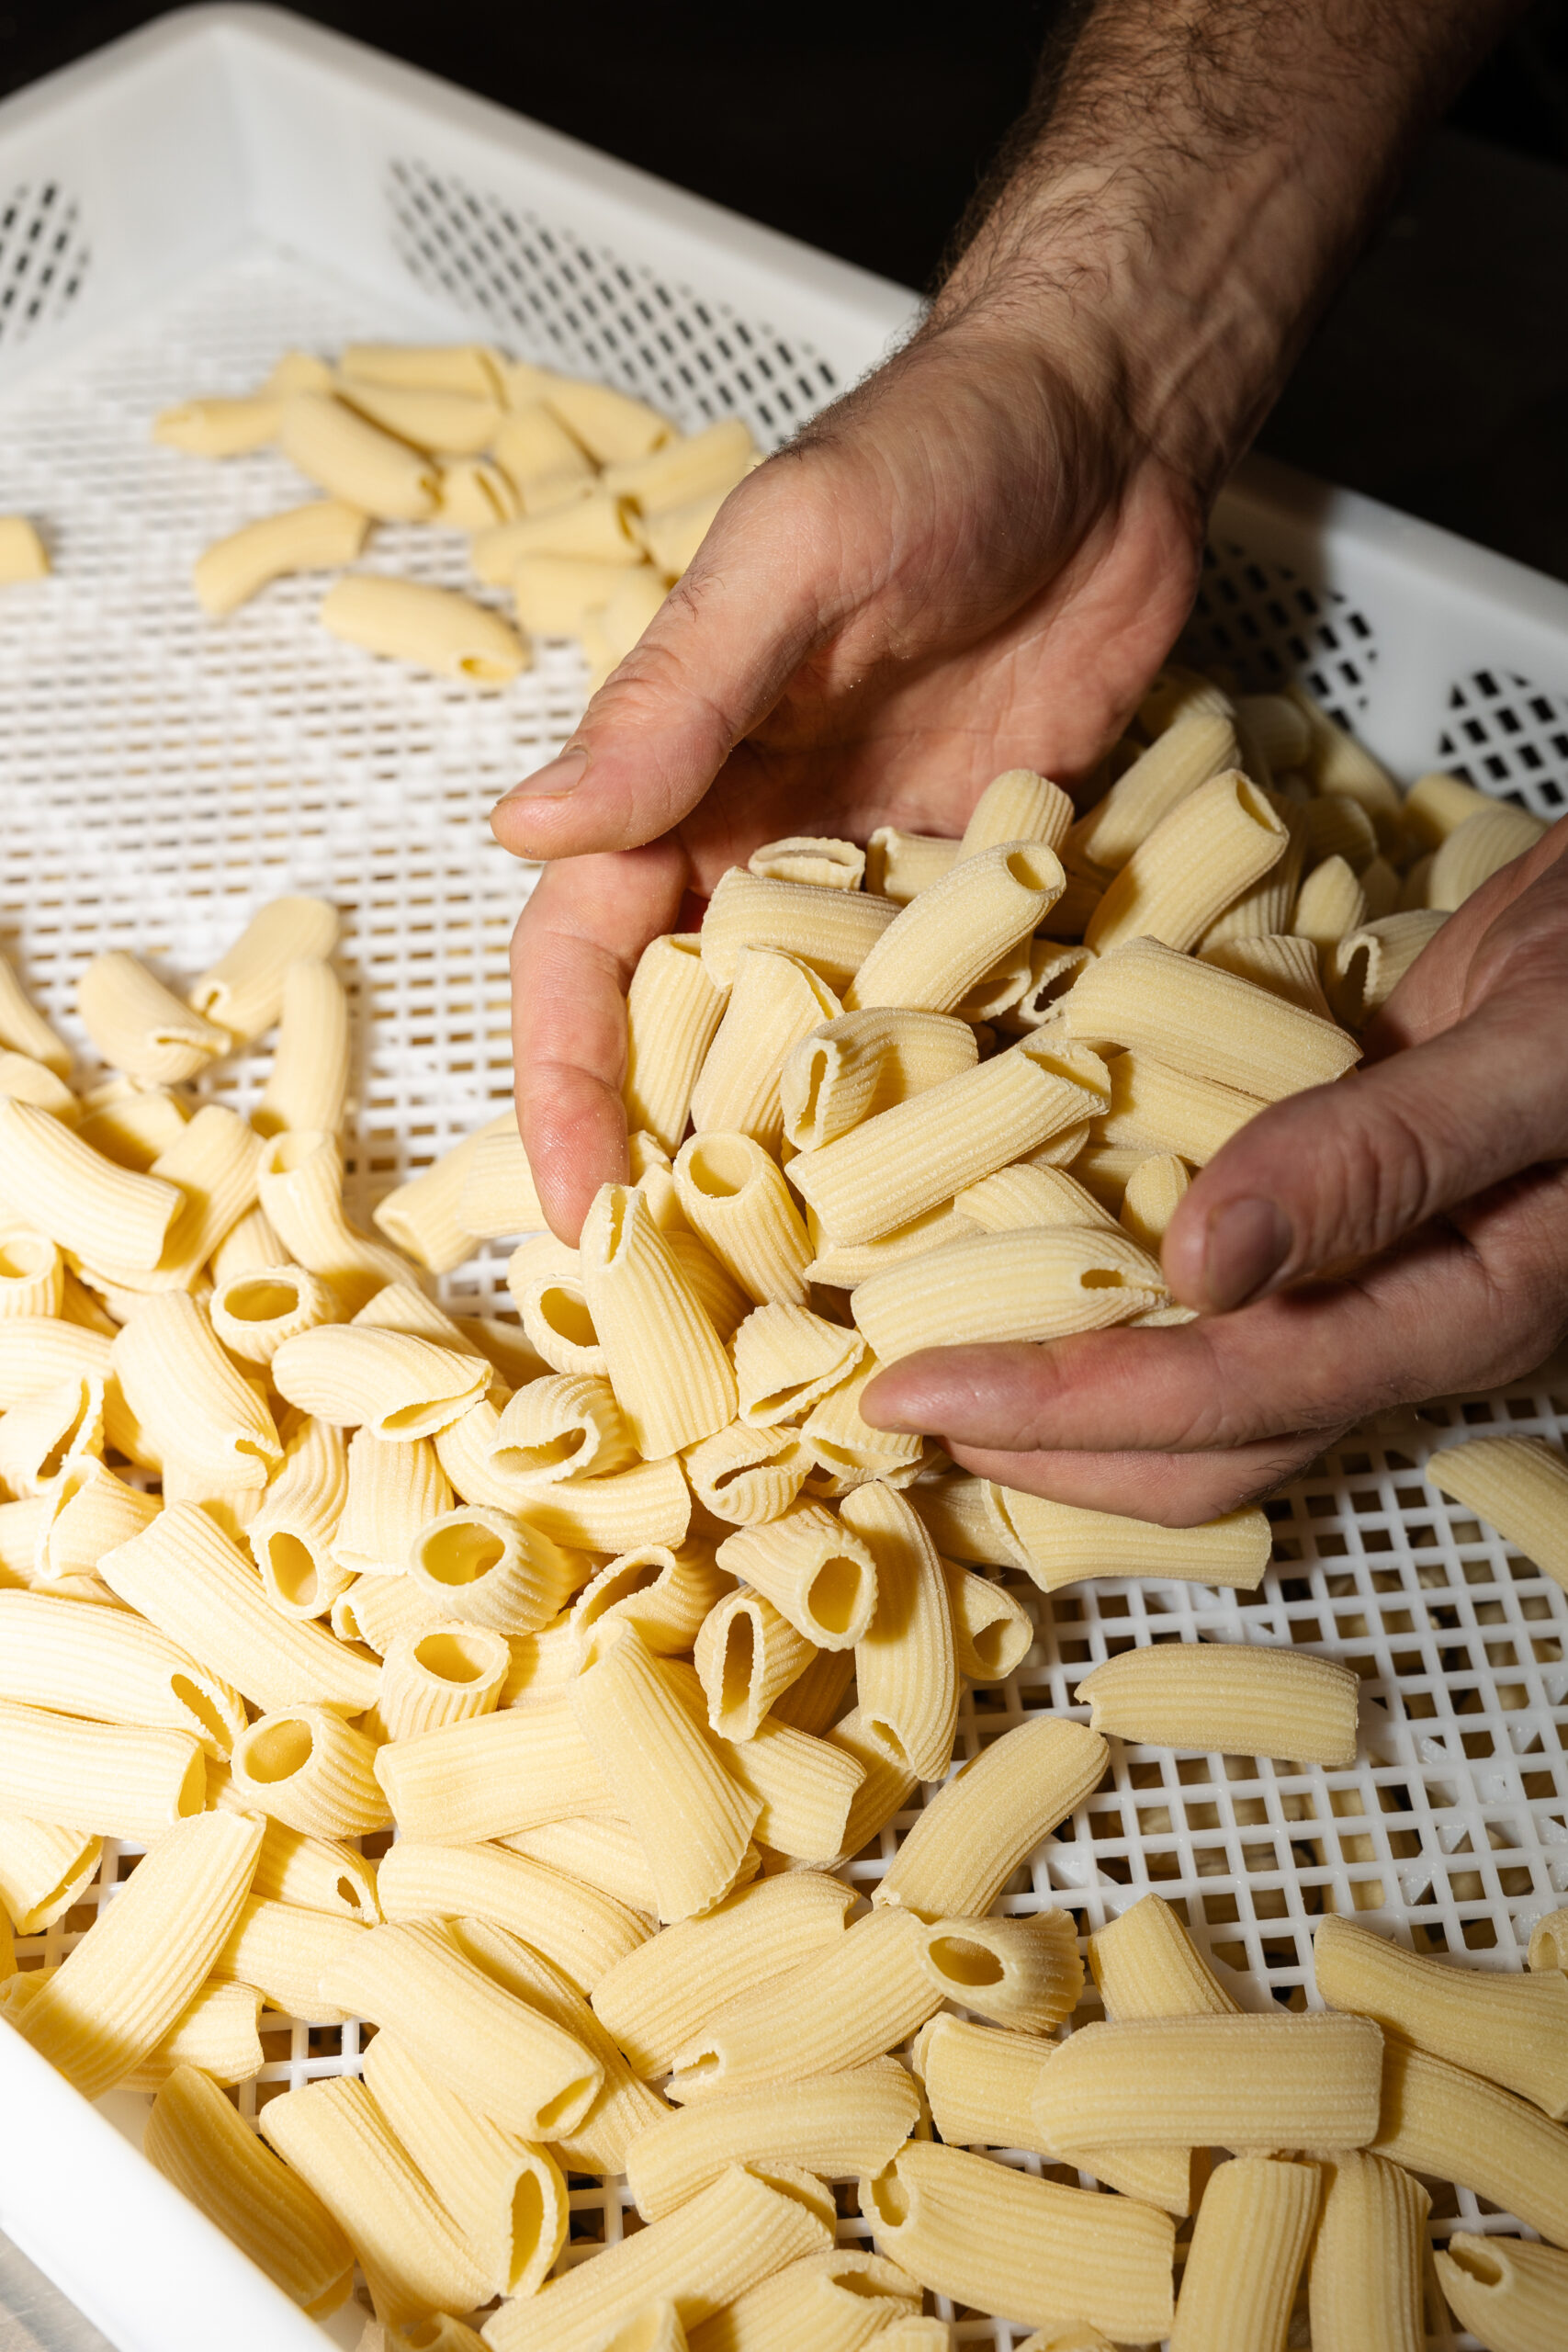 Sud's new venture in Manchester will be called Rigatoni's